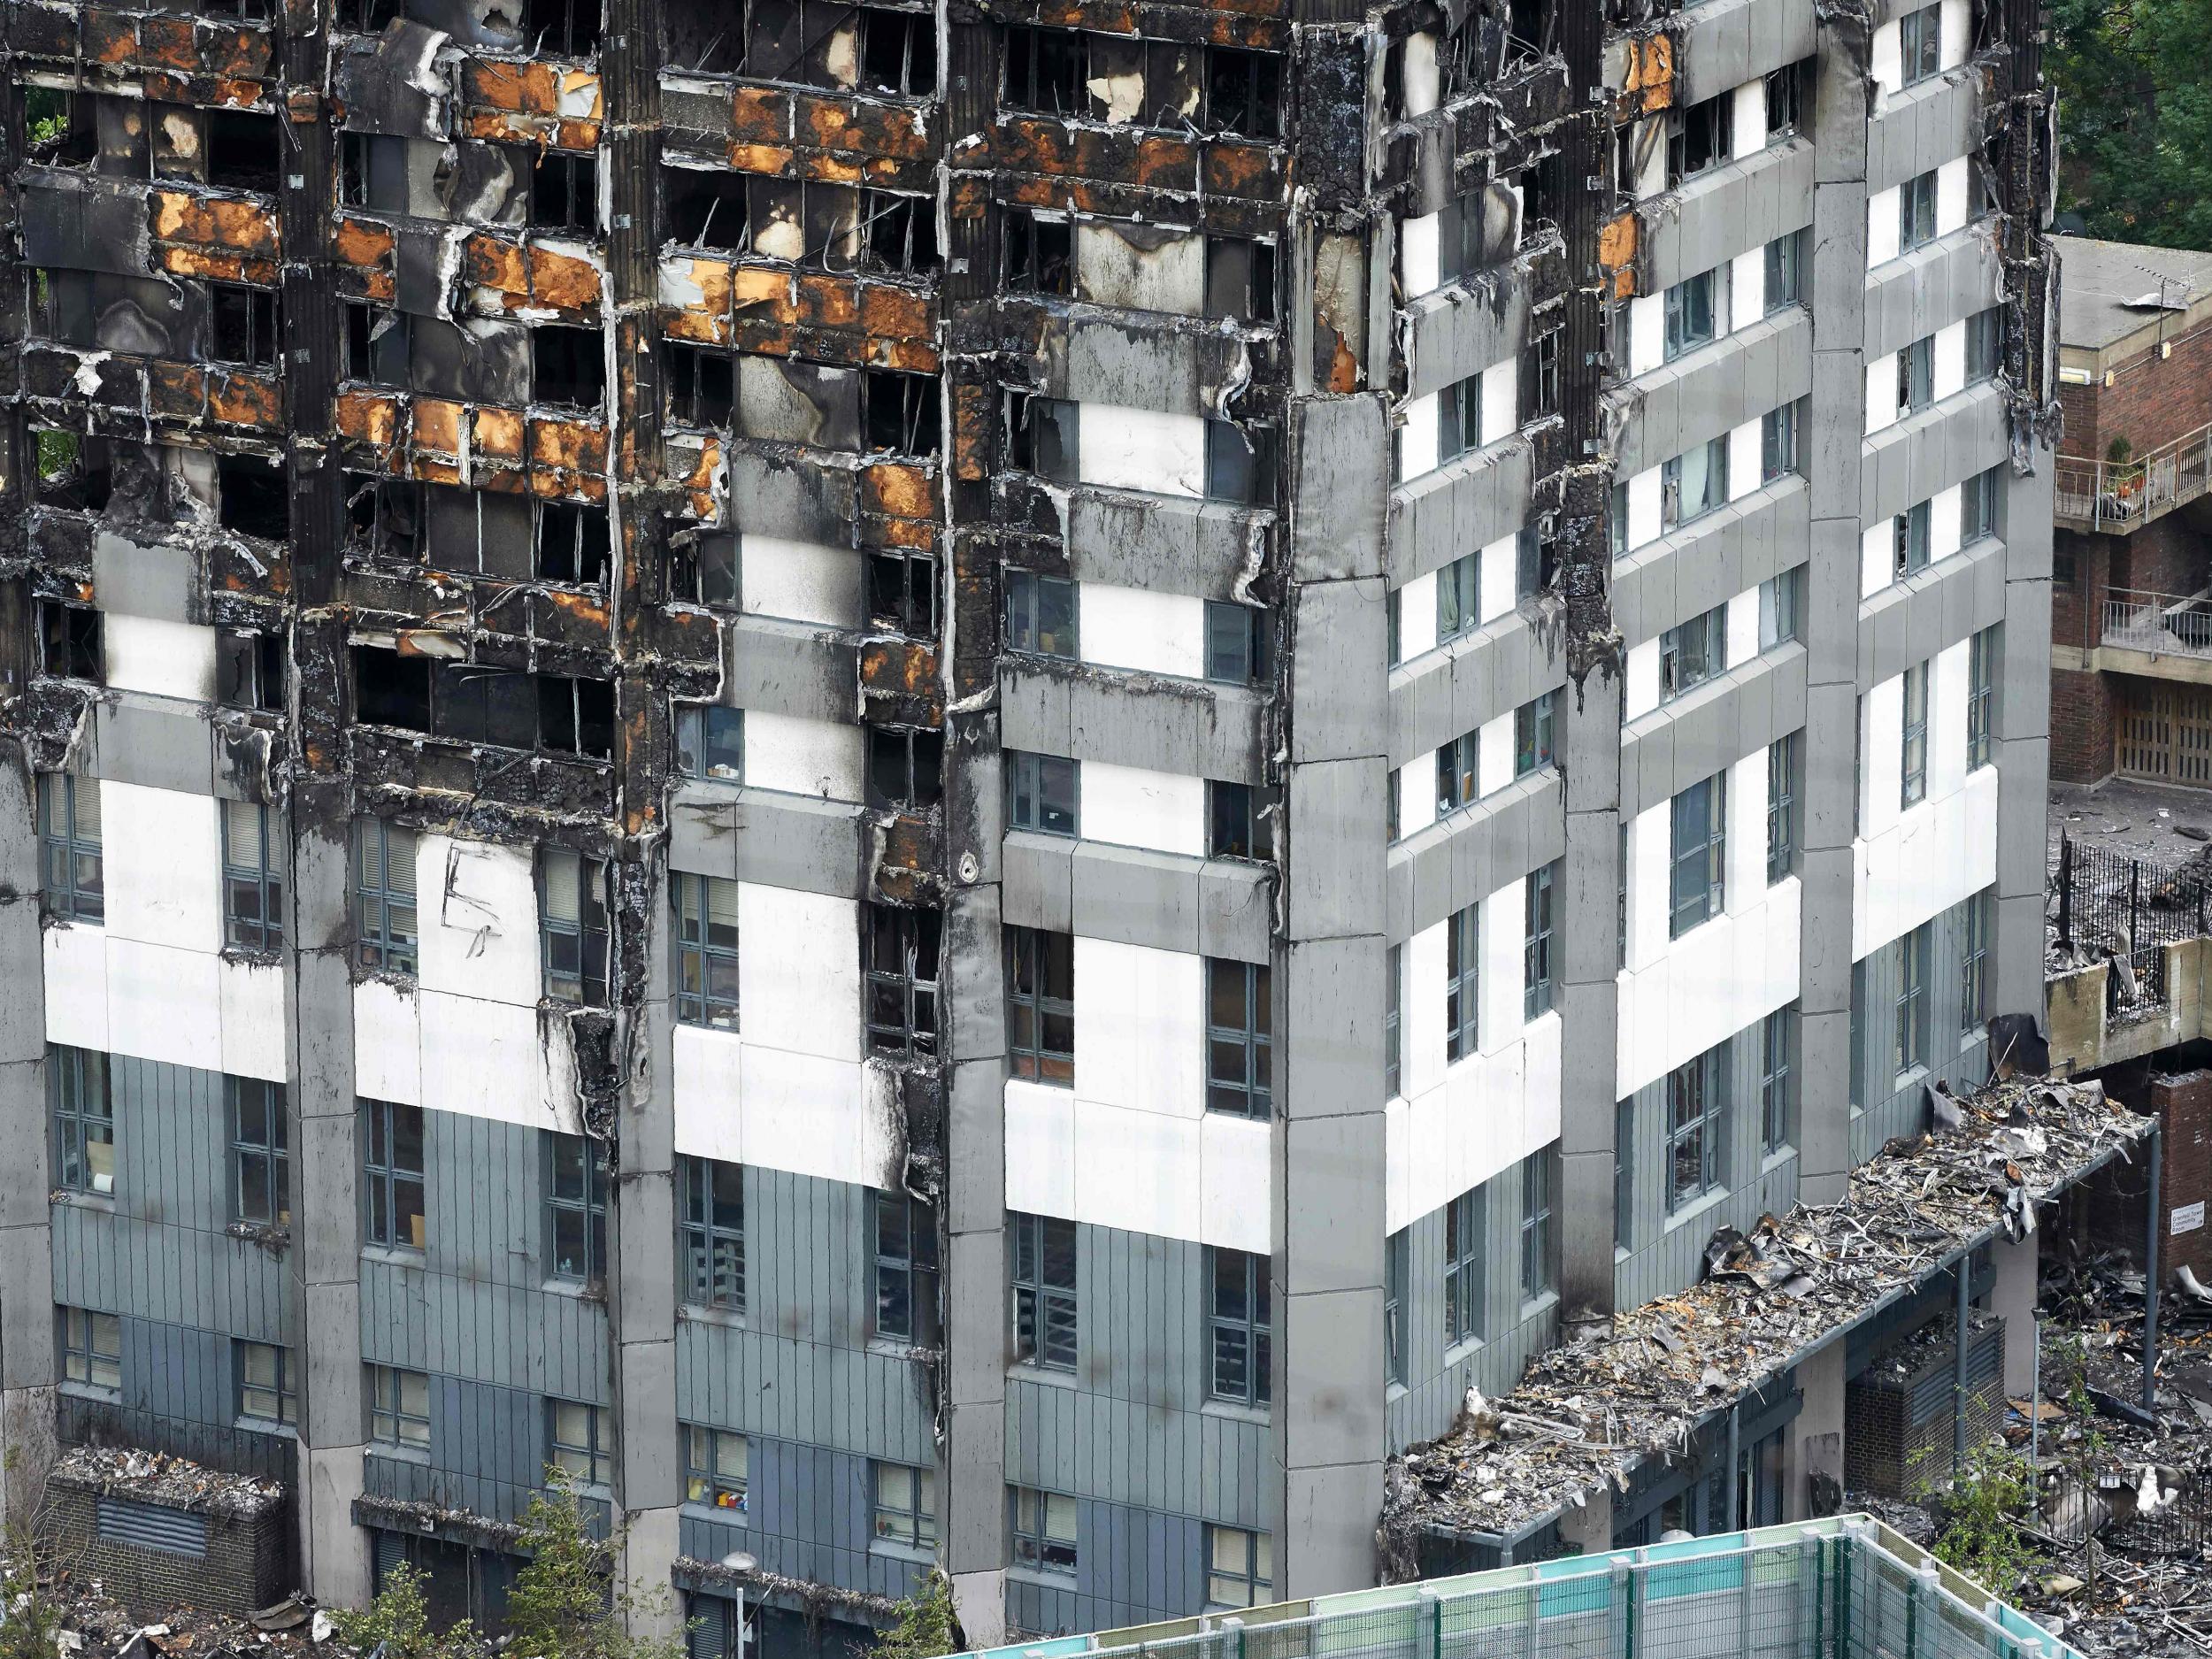 Sneers directed over the decades by governments and media against ‘Health and Safety’ as the apogee of unnecessary and intrusive bureaucratic meddling, set the stage for the Grenfell Tower tragedy